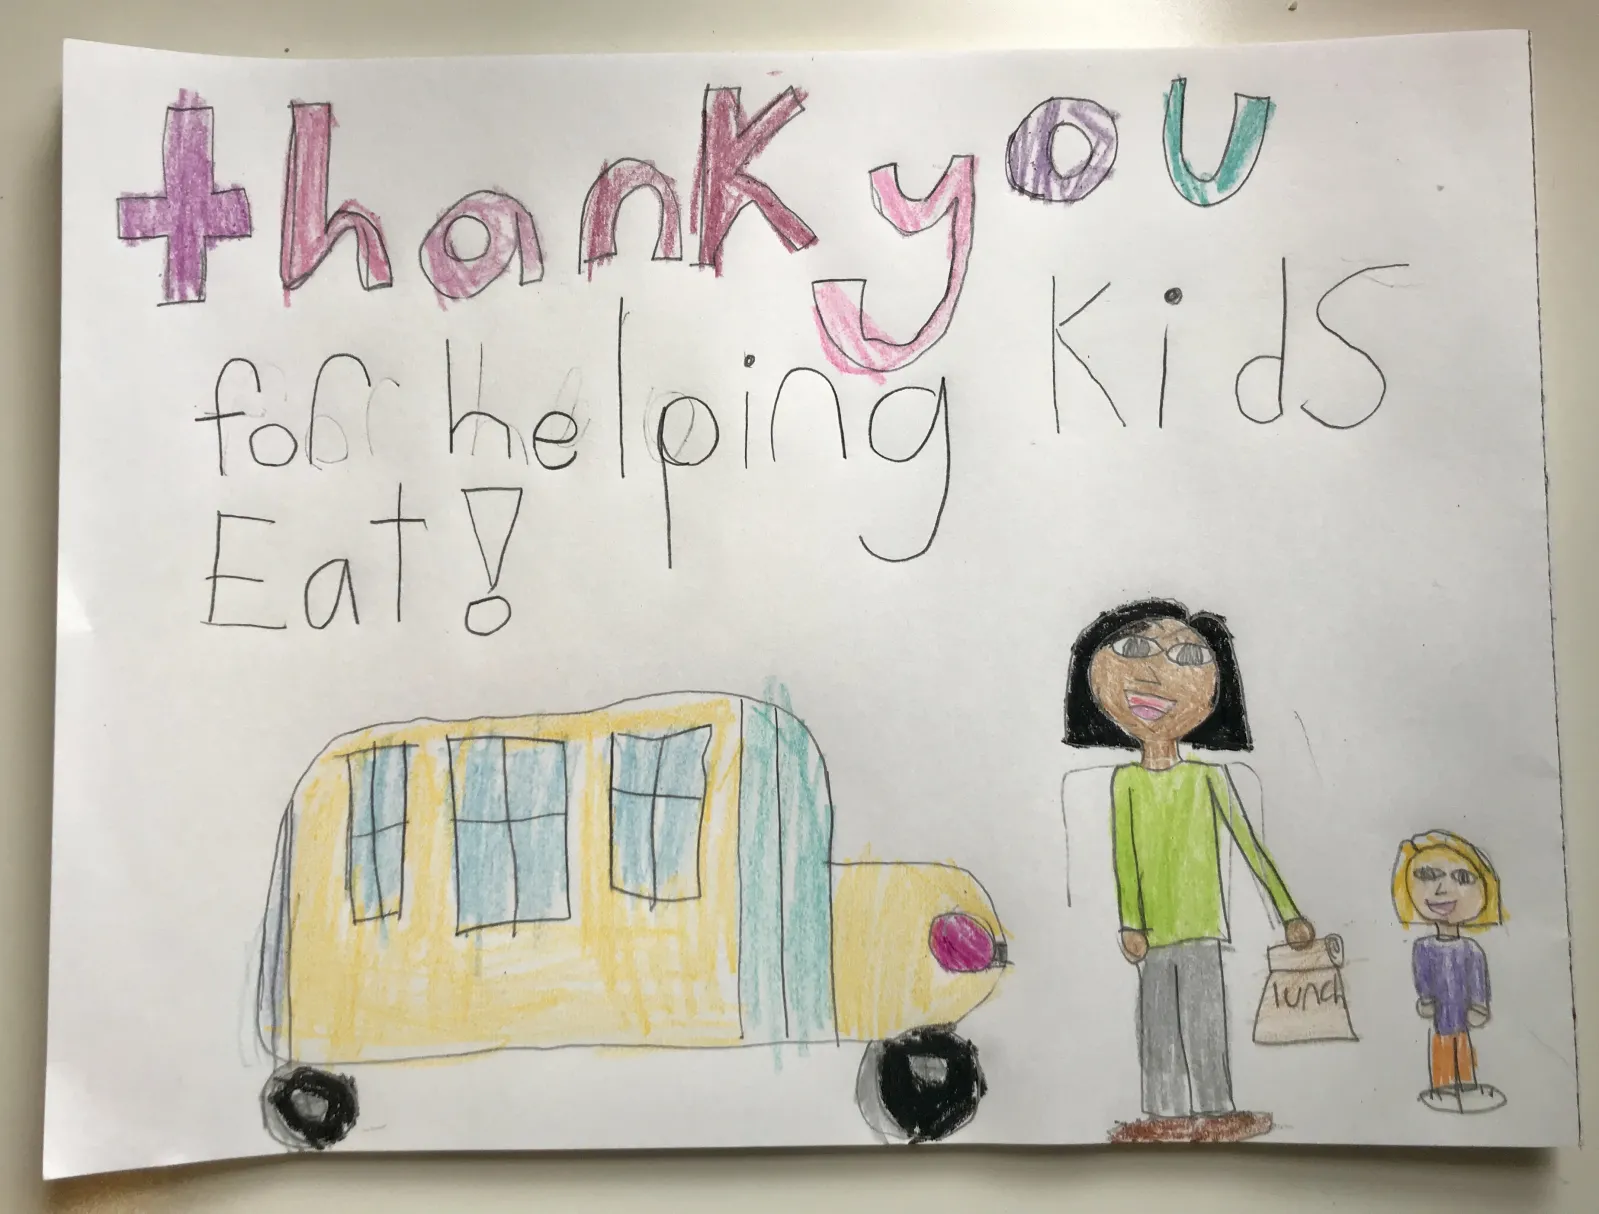 Thank you drawing by kid for those feeding kids.